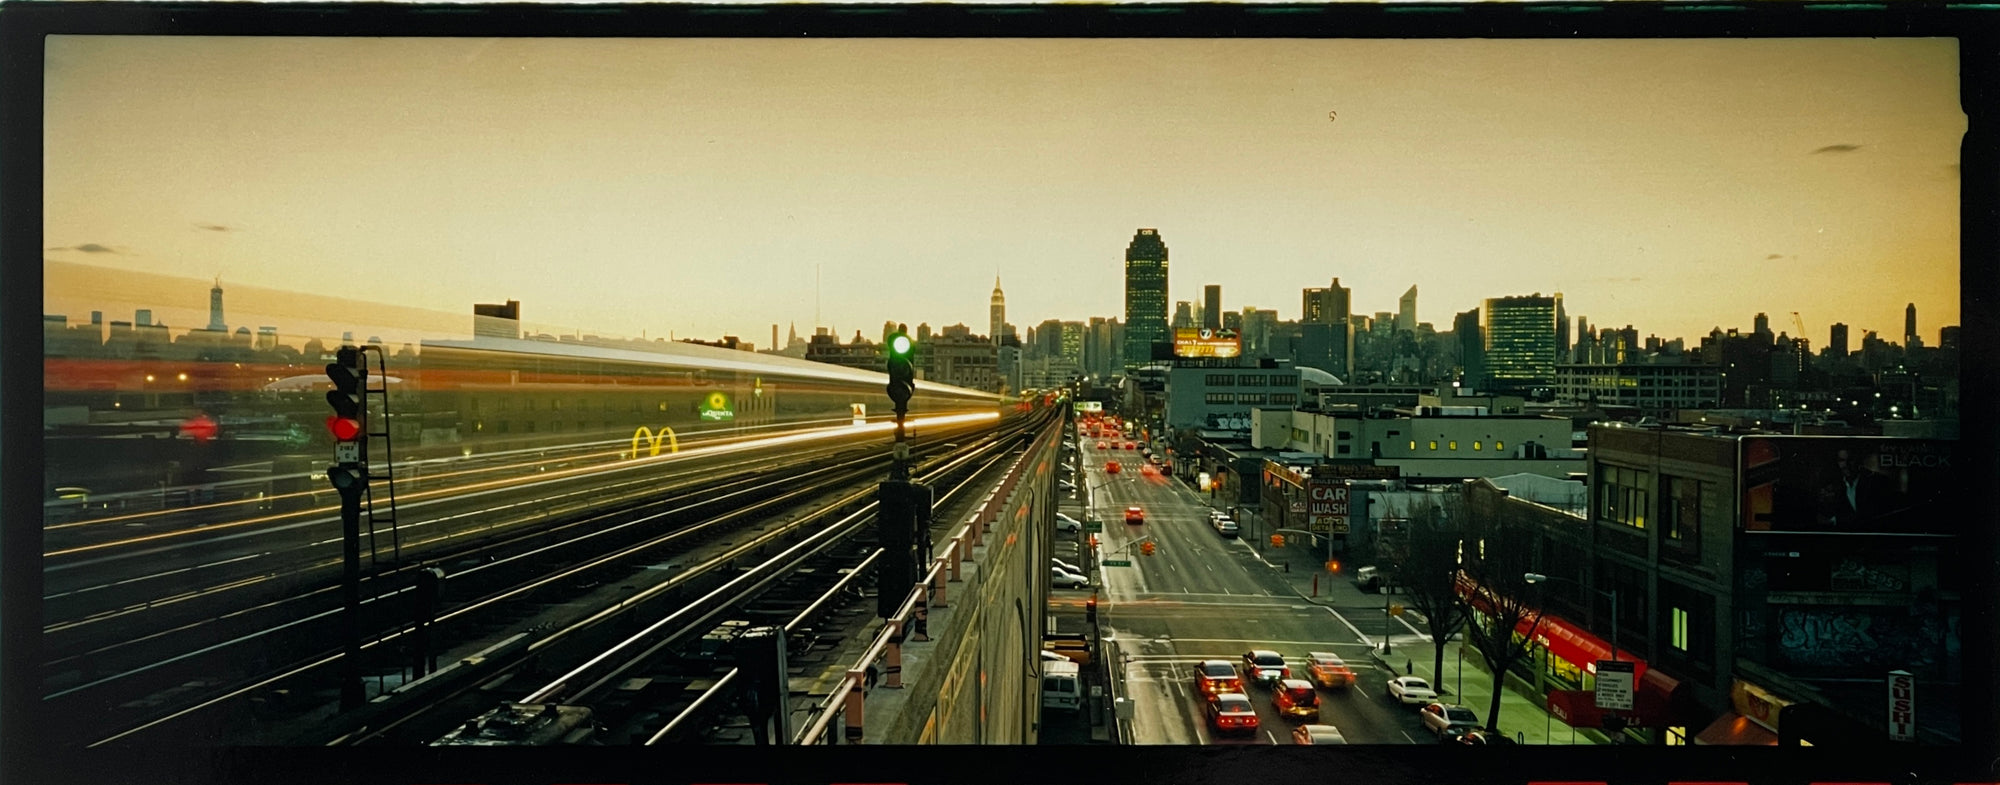 Panorama photograph taken at sunset from the New York 7 Line looking towards the Manhattan skyline.